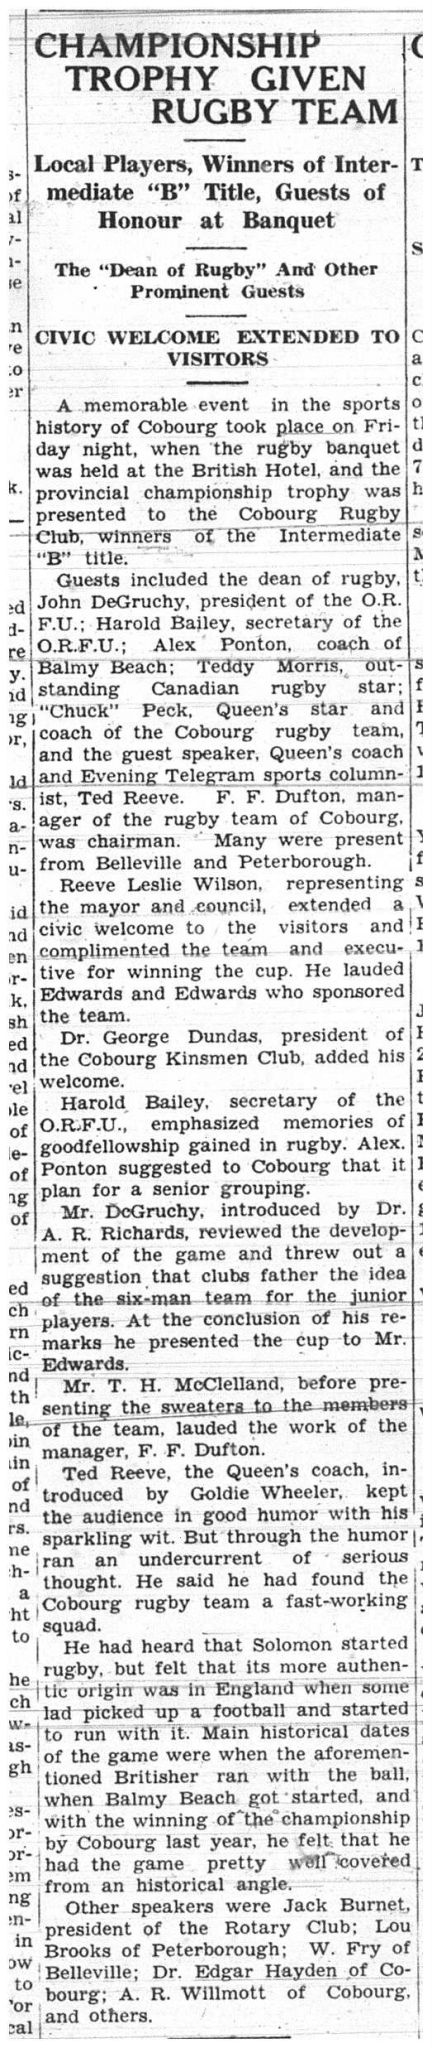 1928-03-31 Rugby